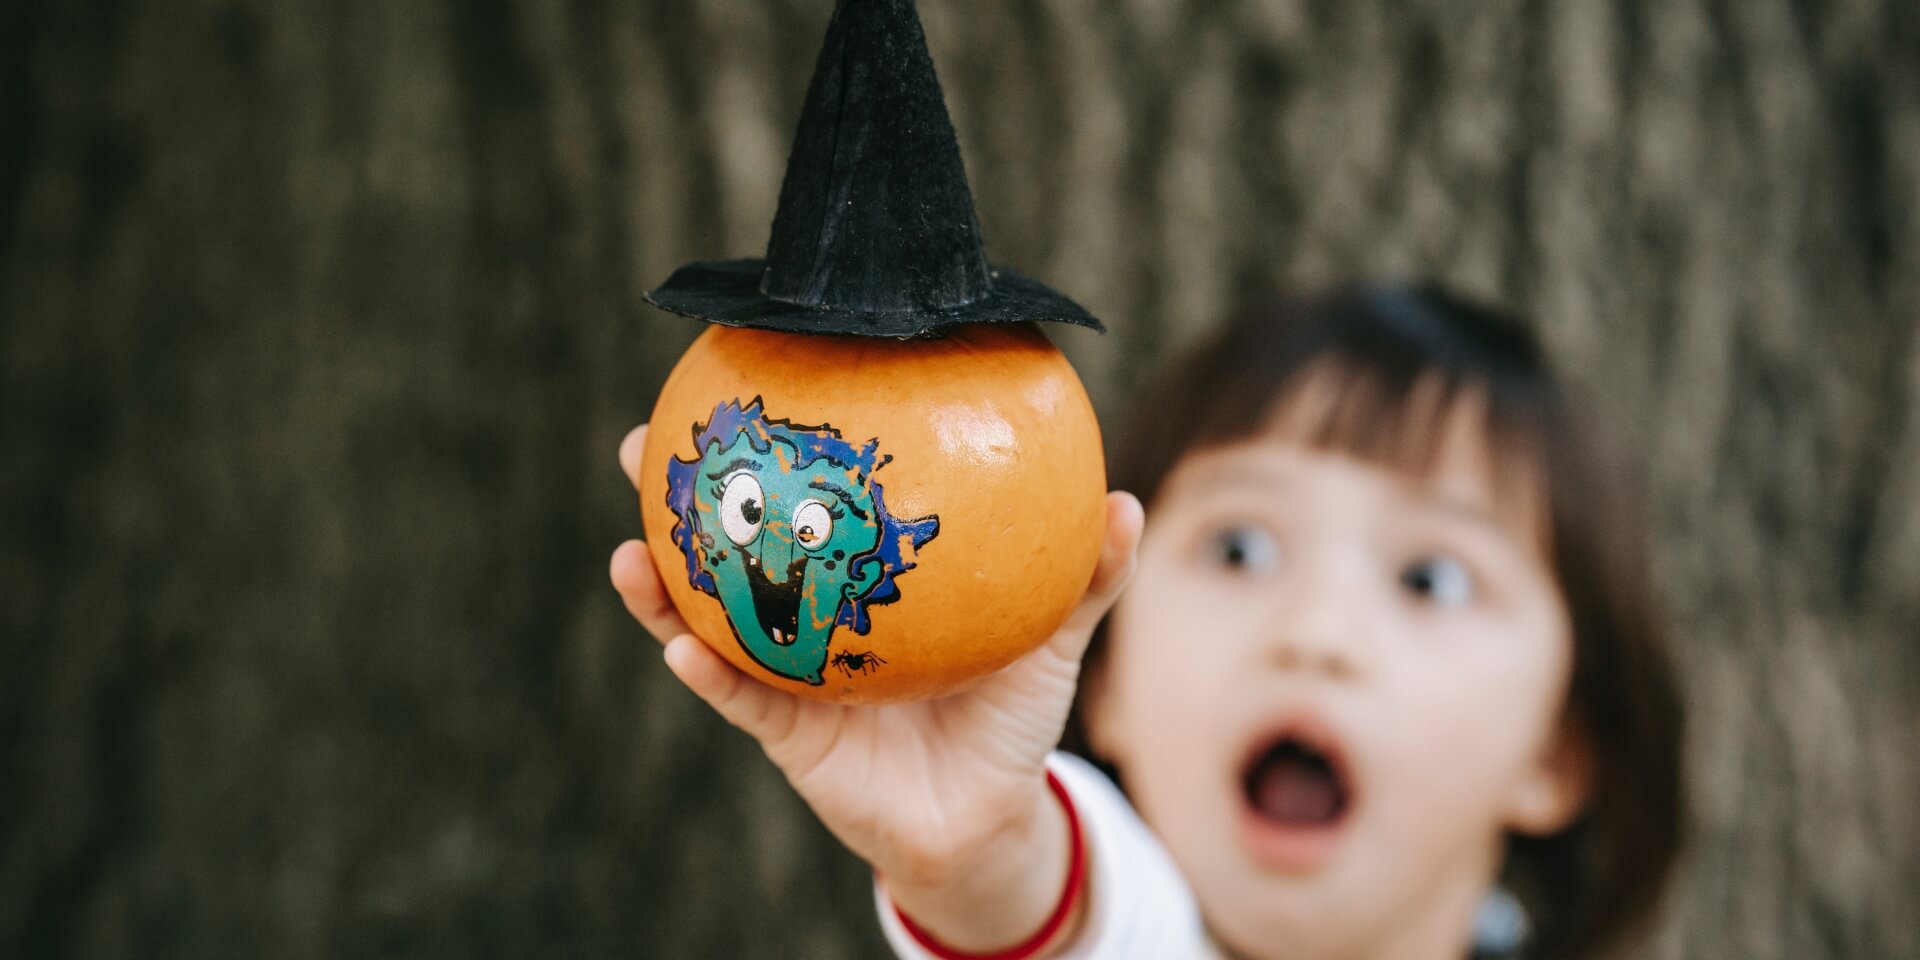 Child holding a decorated pumpkin one of many Halloween events for kids